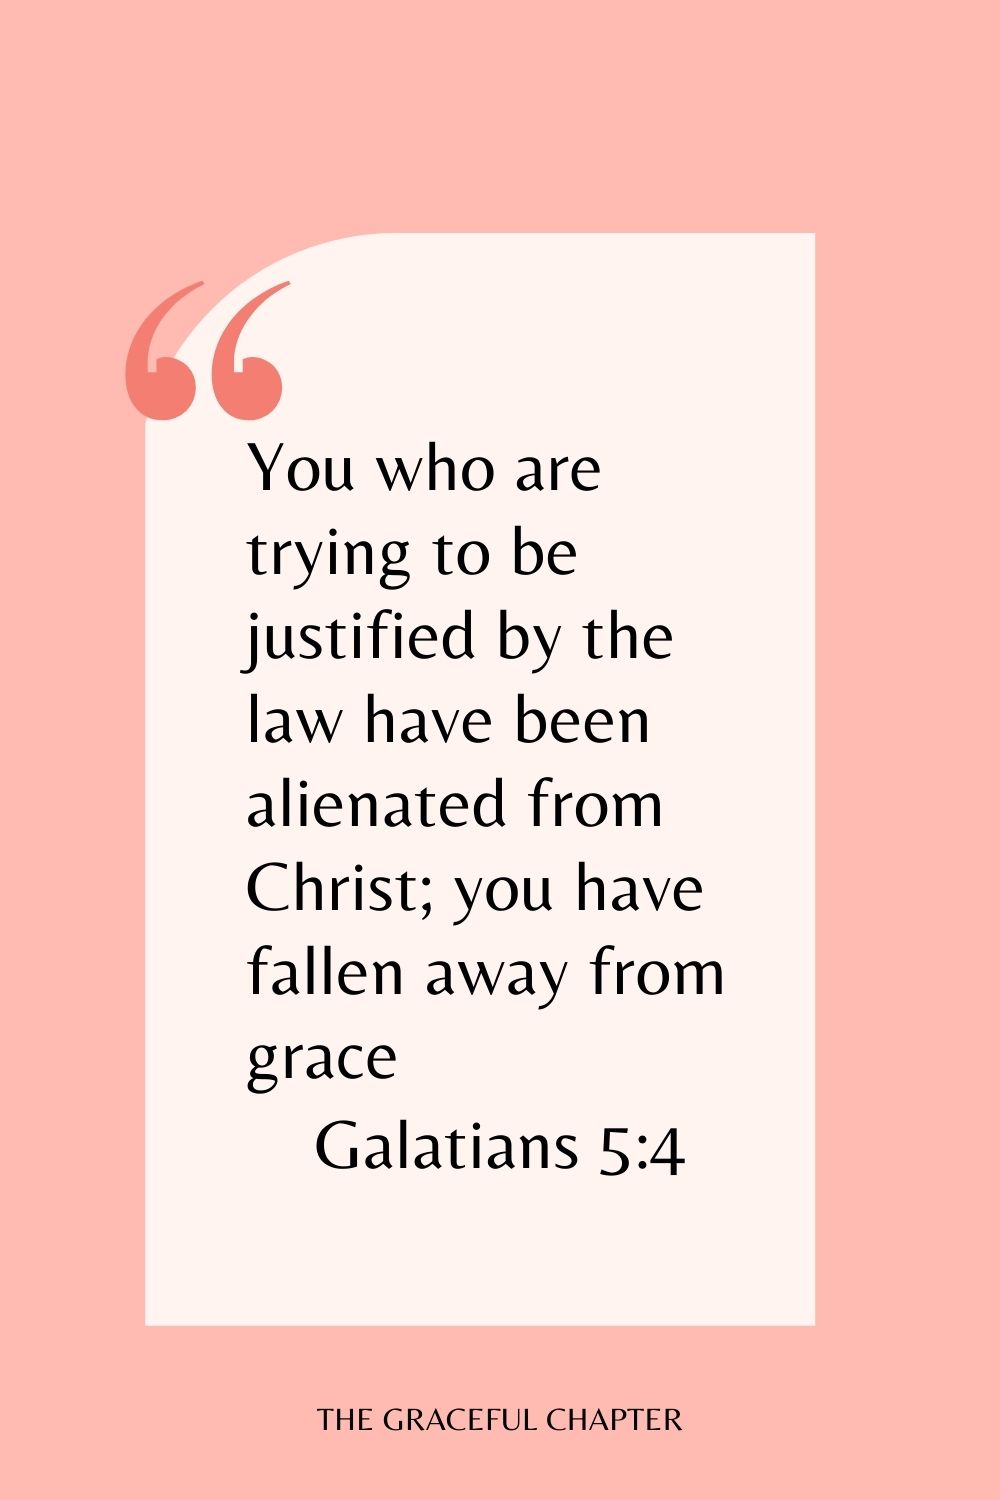 You who are trying to be justified by the law have been alienated from Christ; you have fallen away from grace. Galatians 5:4